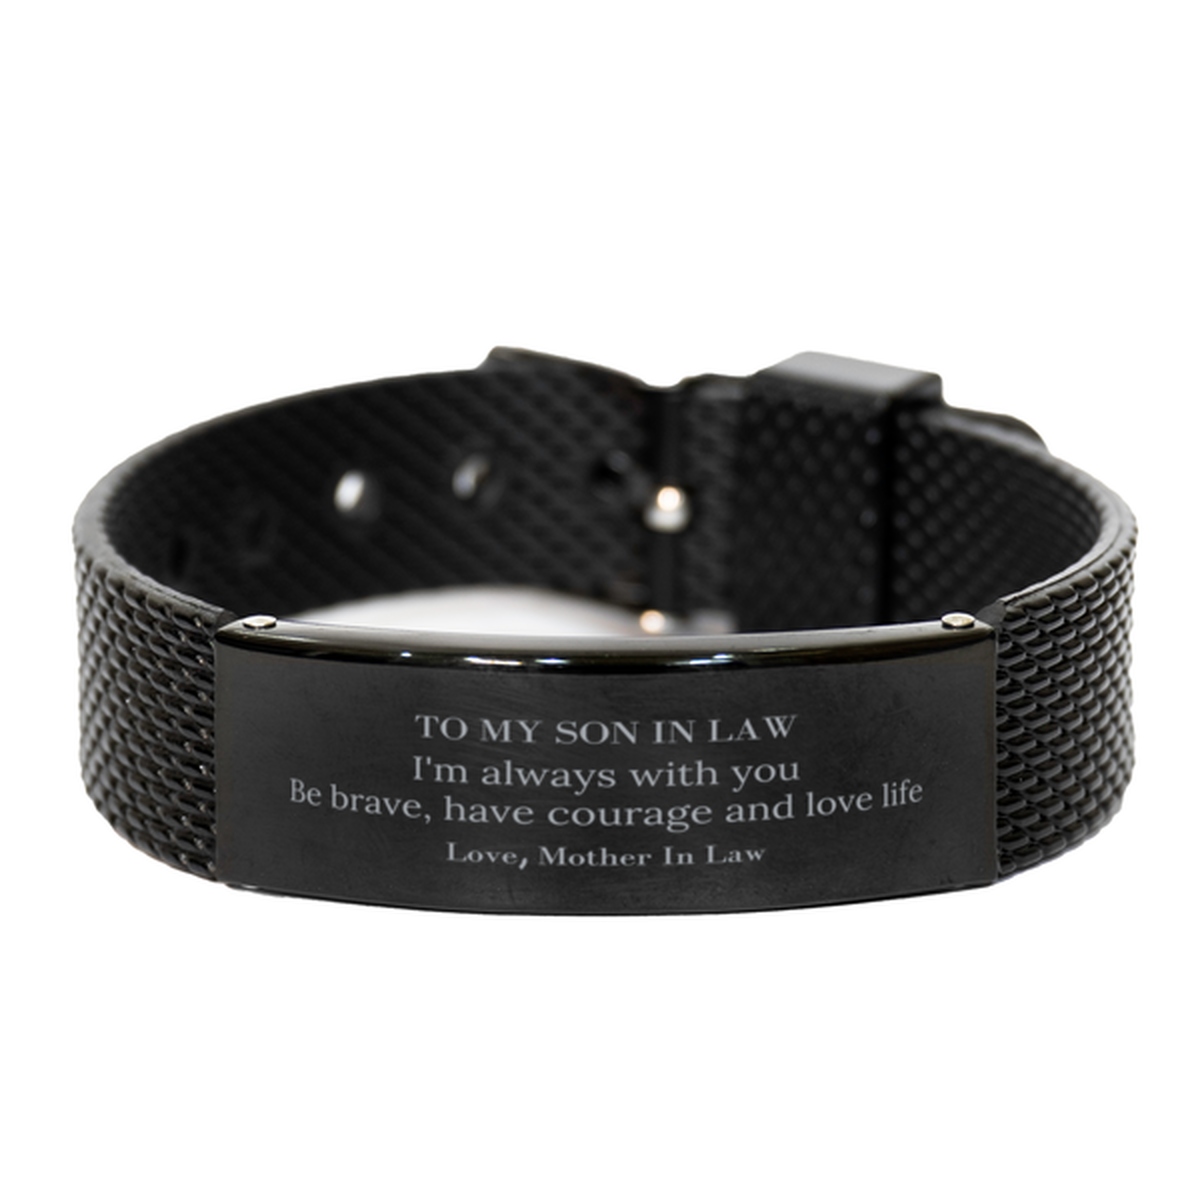 To My Son In Law Gifts from Mother In Law, Unique Black Shark Mesh Bracelet Inspirational Christmas Birthday Graduation Gifts for Son In Law I'm always with you. Be brave, have courage and love life. Love, Mother In Law